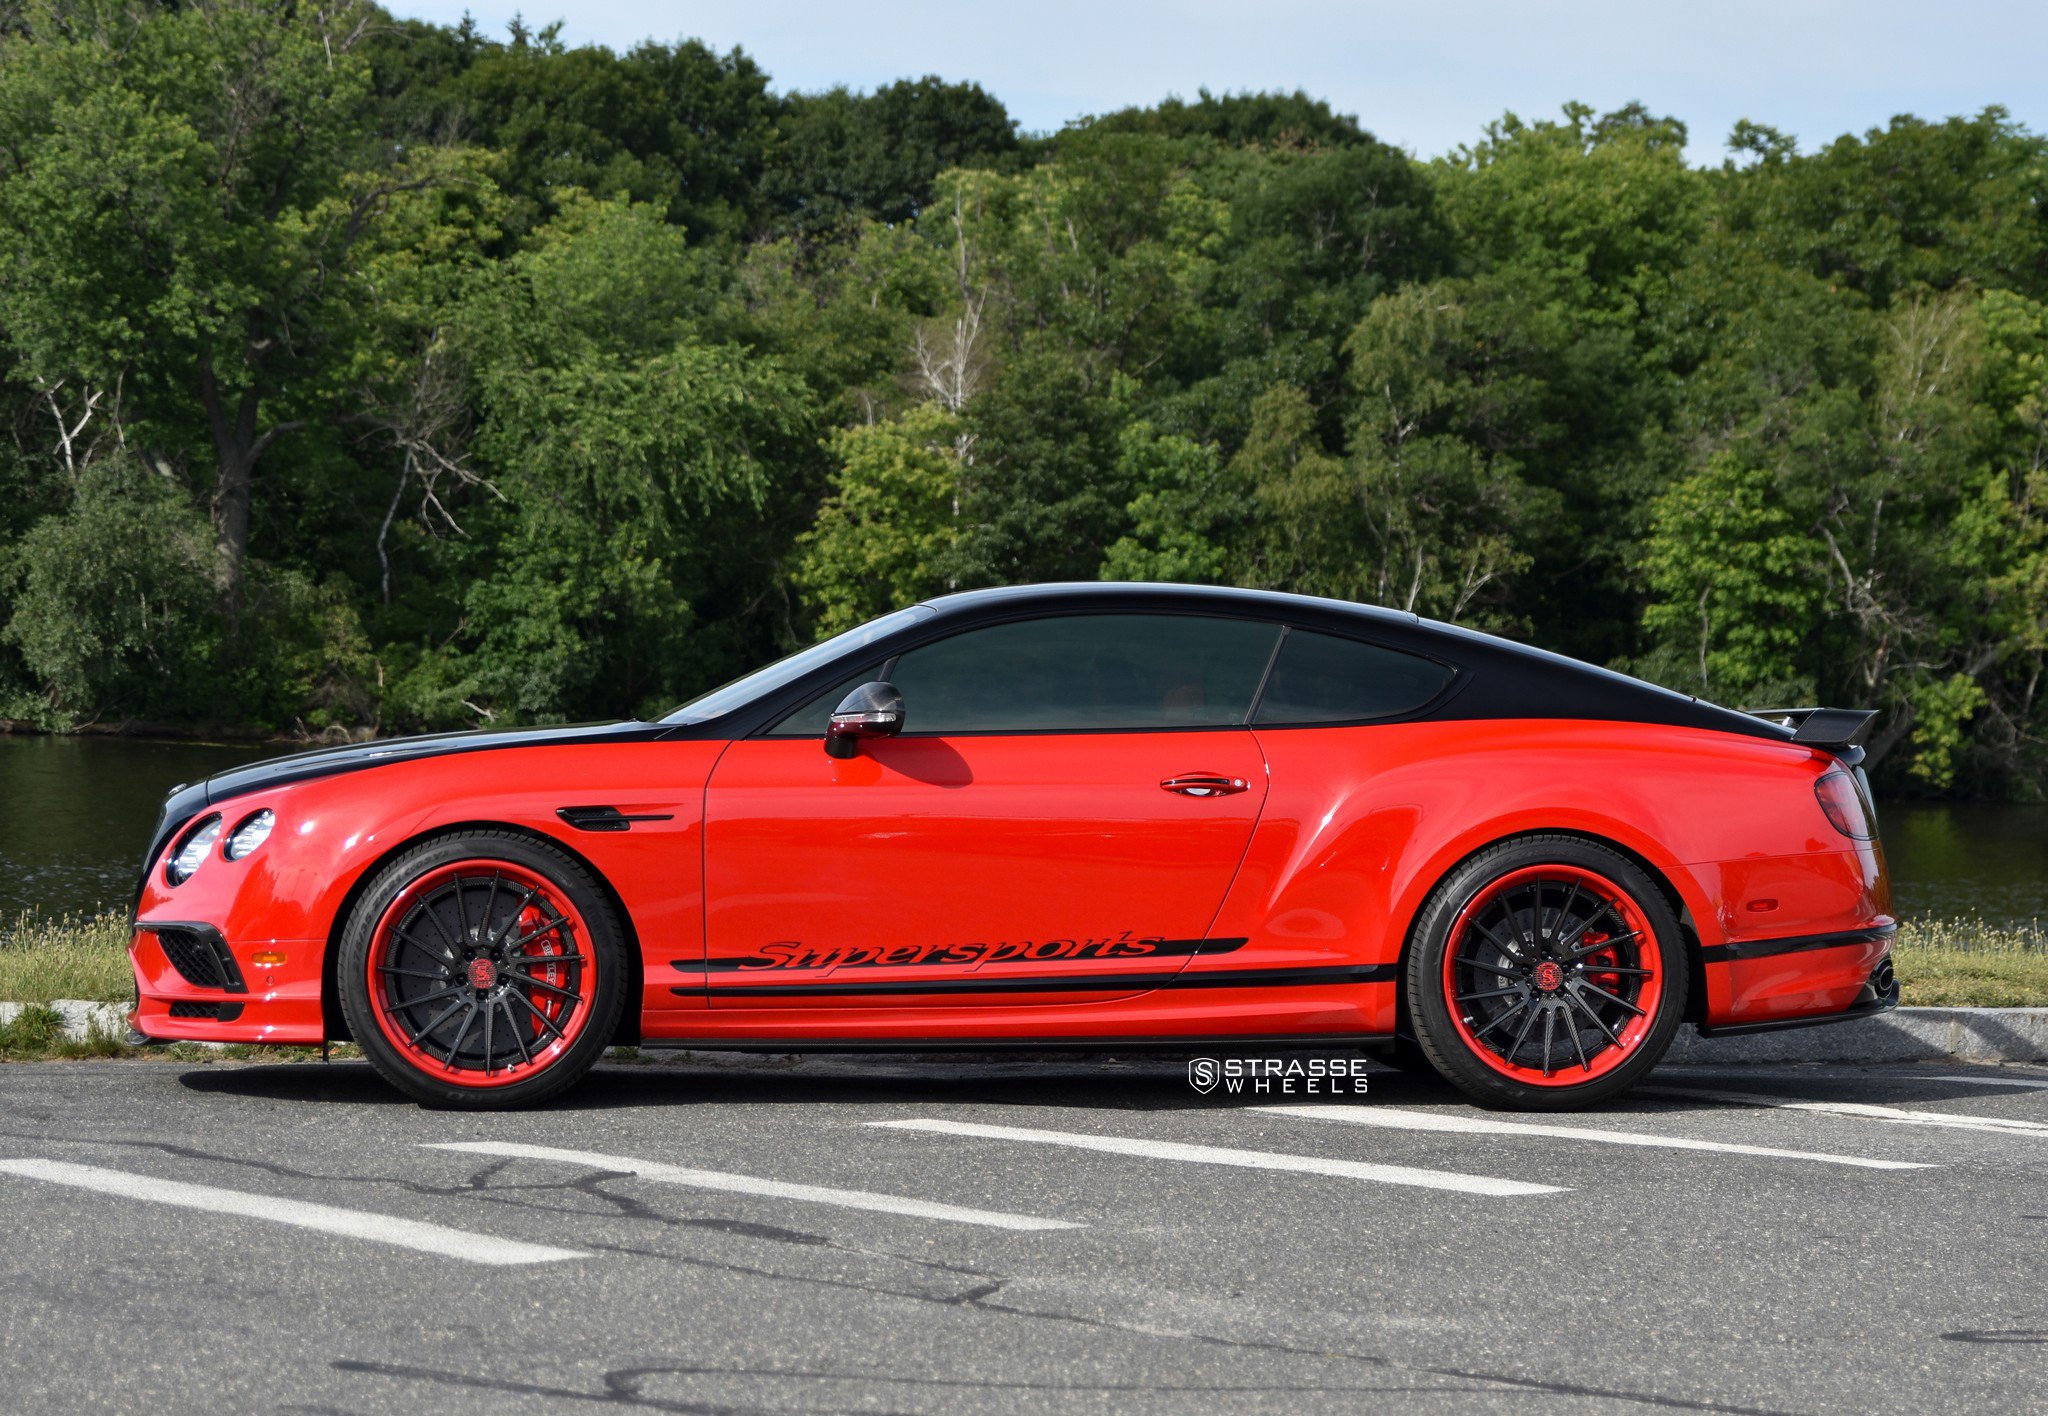 Aftermarket Side Mirrors on Red Bentley Continental - Photo by Strasse Wheels